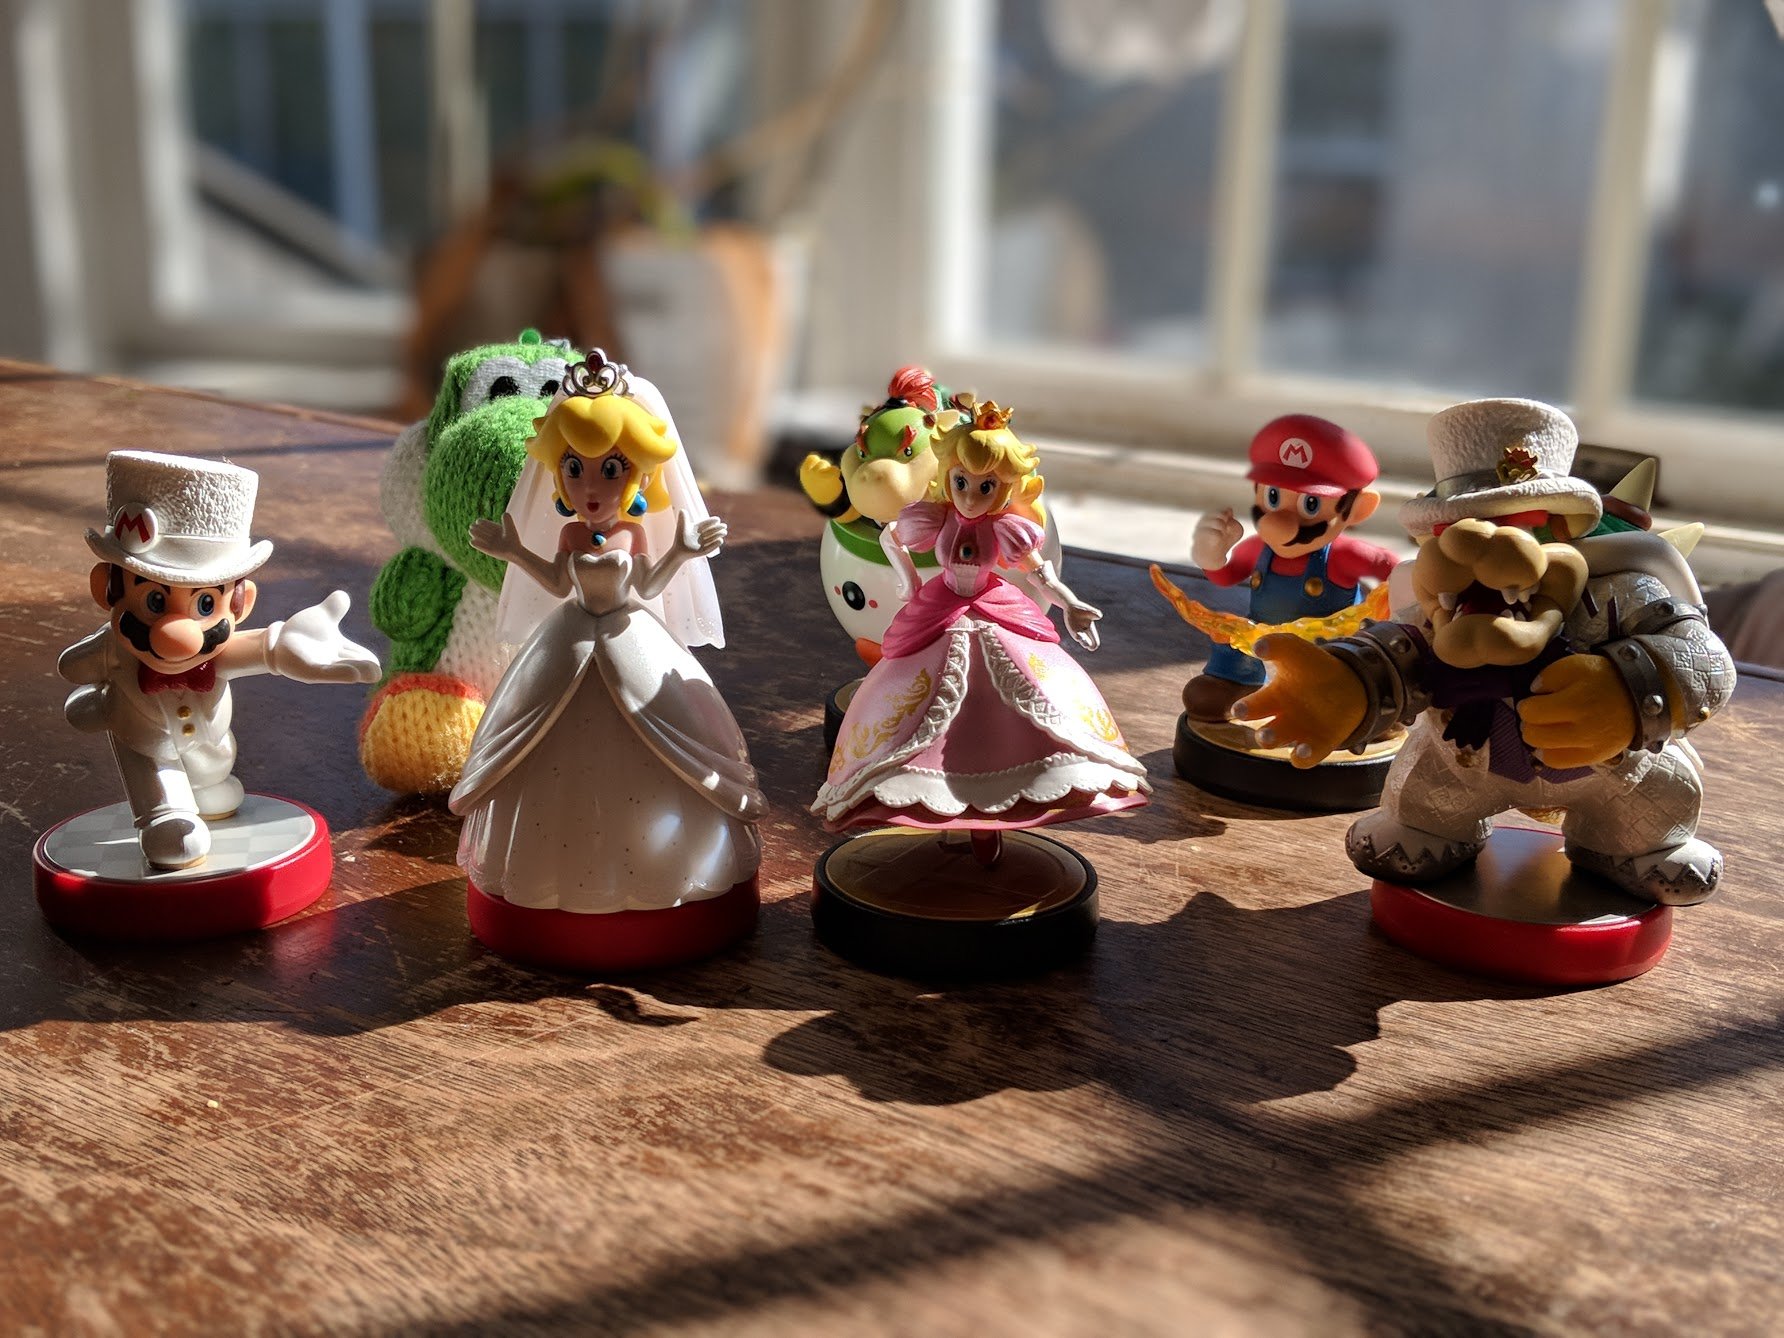 køn . Jakke Everything you need to know about amiibo in Super Mario Odyssey | iMore